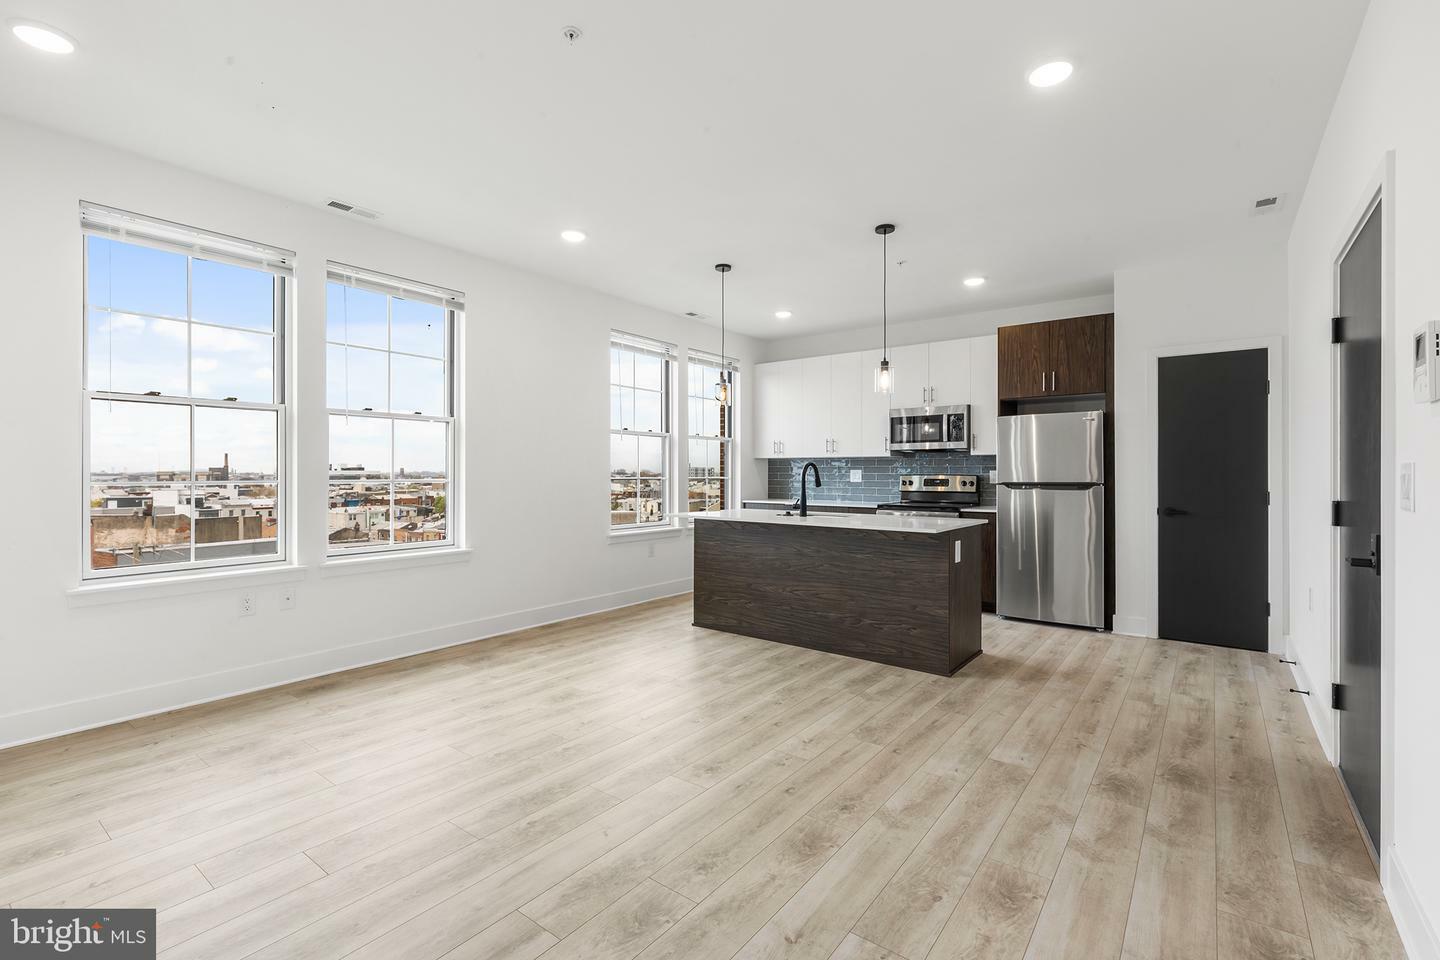 Spacious and well-equipped kitchen in a Philadelphia rental, showcasing stainless steel appliances and granite countertops.